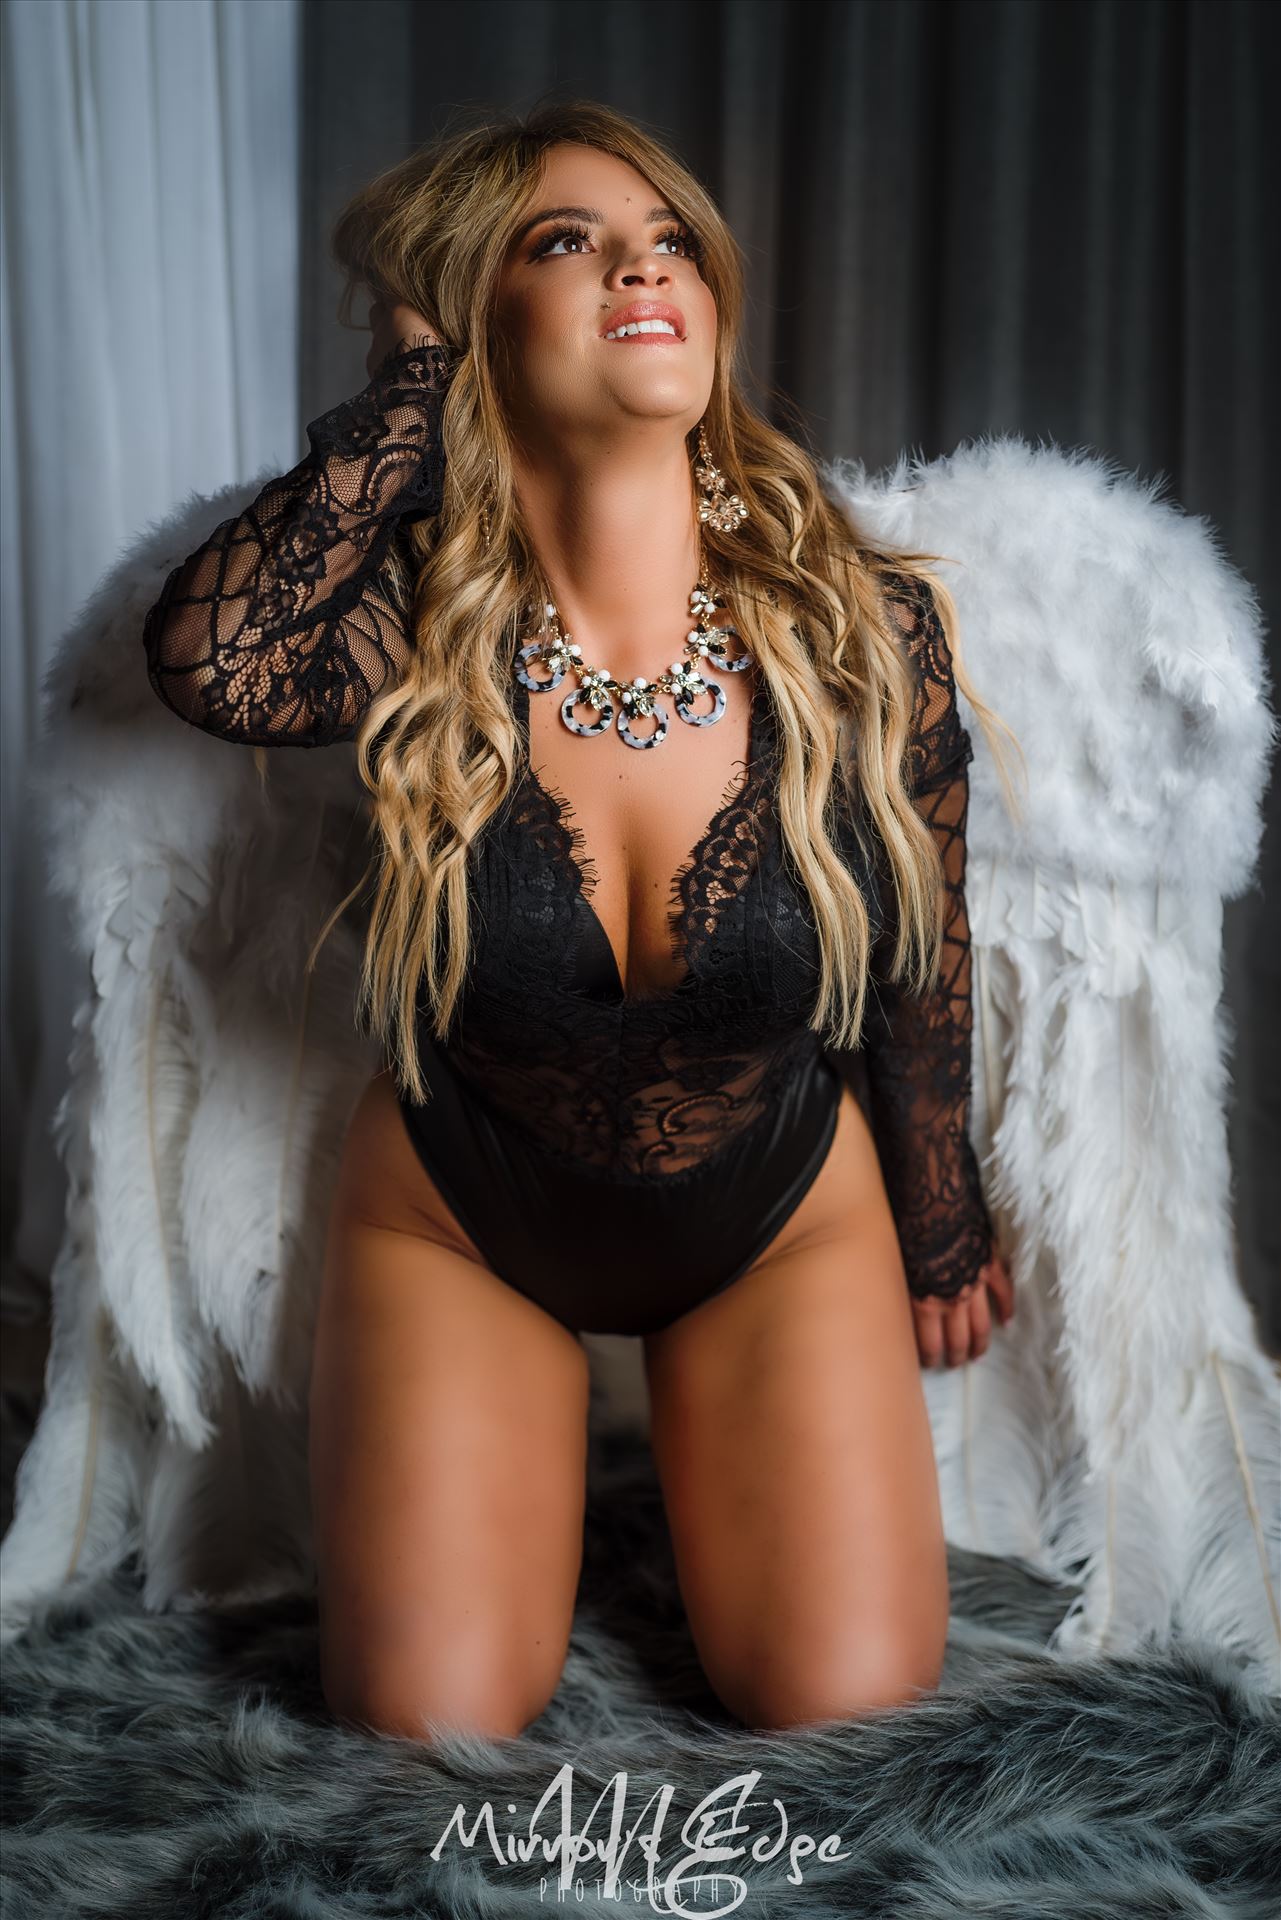 Port WM-5572.JPG Beachfront Boudoir by Mirror's Edge Photography is a Boutique Luxury Boudoir Photography Studio located just blocks from the beach in Oceano, California. My mission is to show as many women as possible how beautiful they truly are! by Sarah Williams